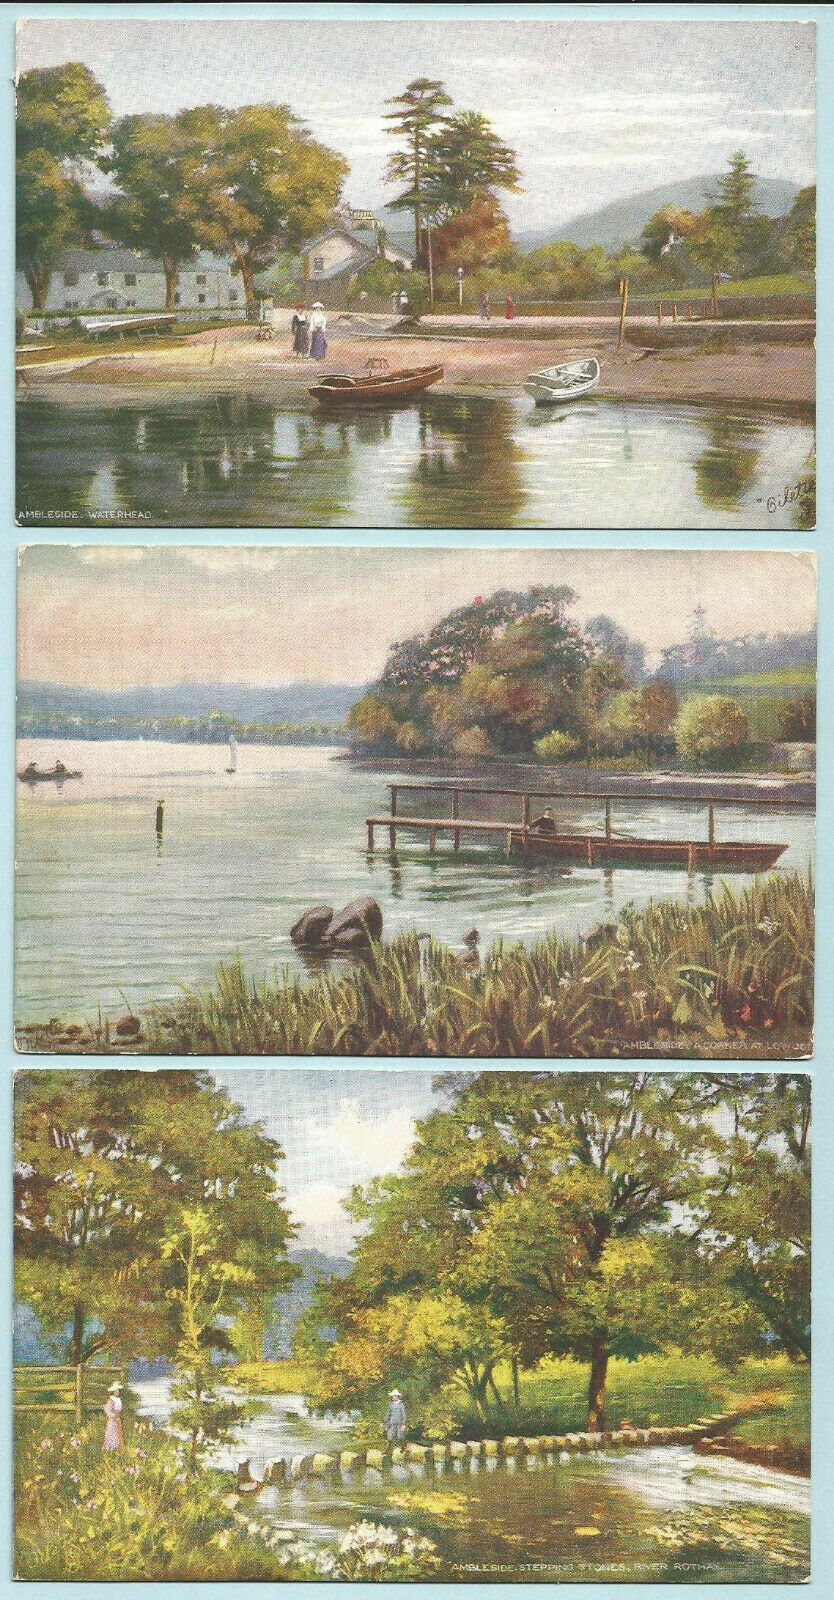 House Clearance - 3 x TUCK 'WORDSWORTH'S COUNTRY - AMBLESIDE' SERIES 7326 - LAKE/RIVER VIEWS 1900s